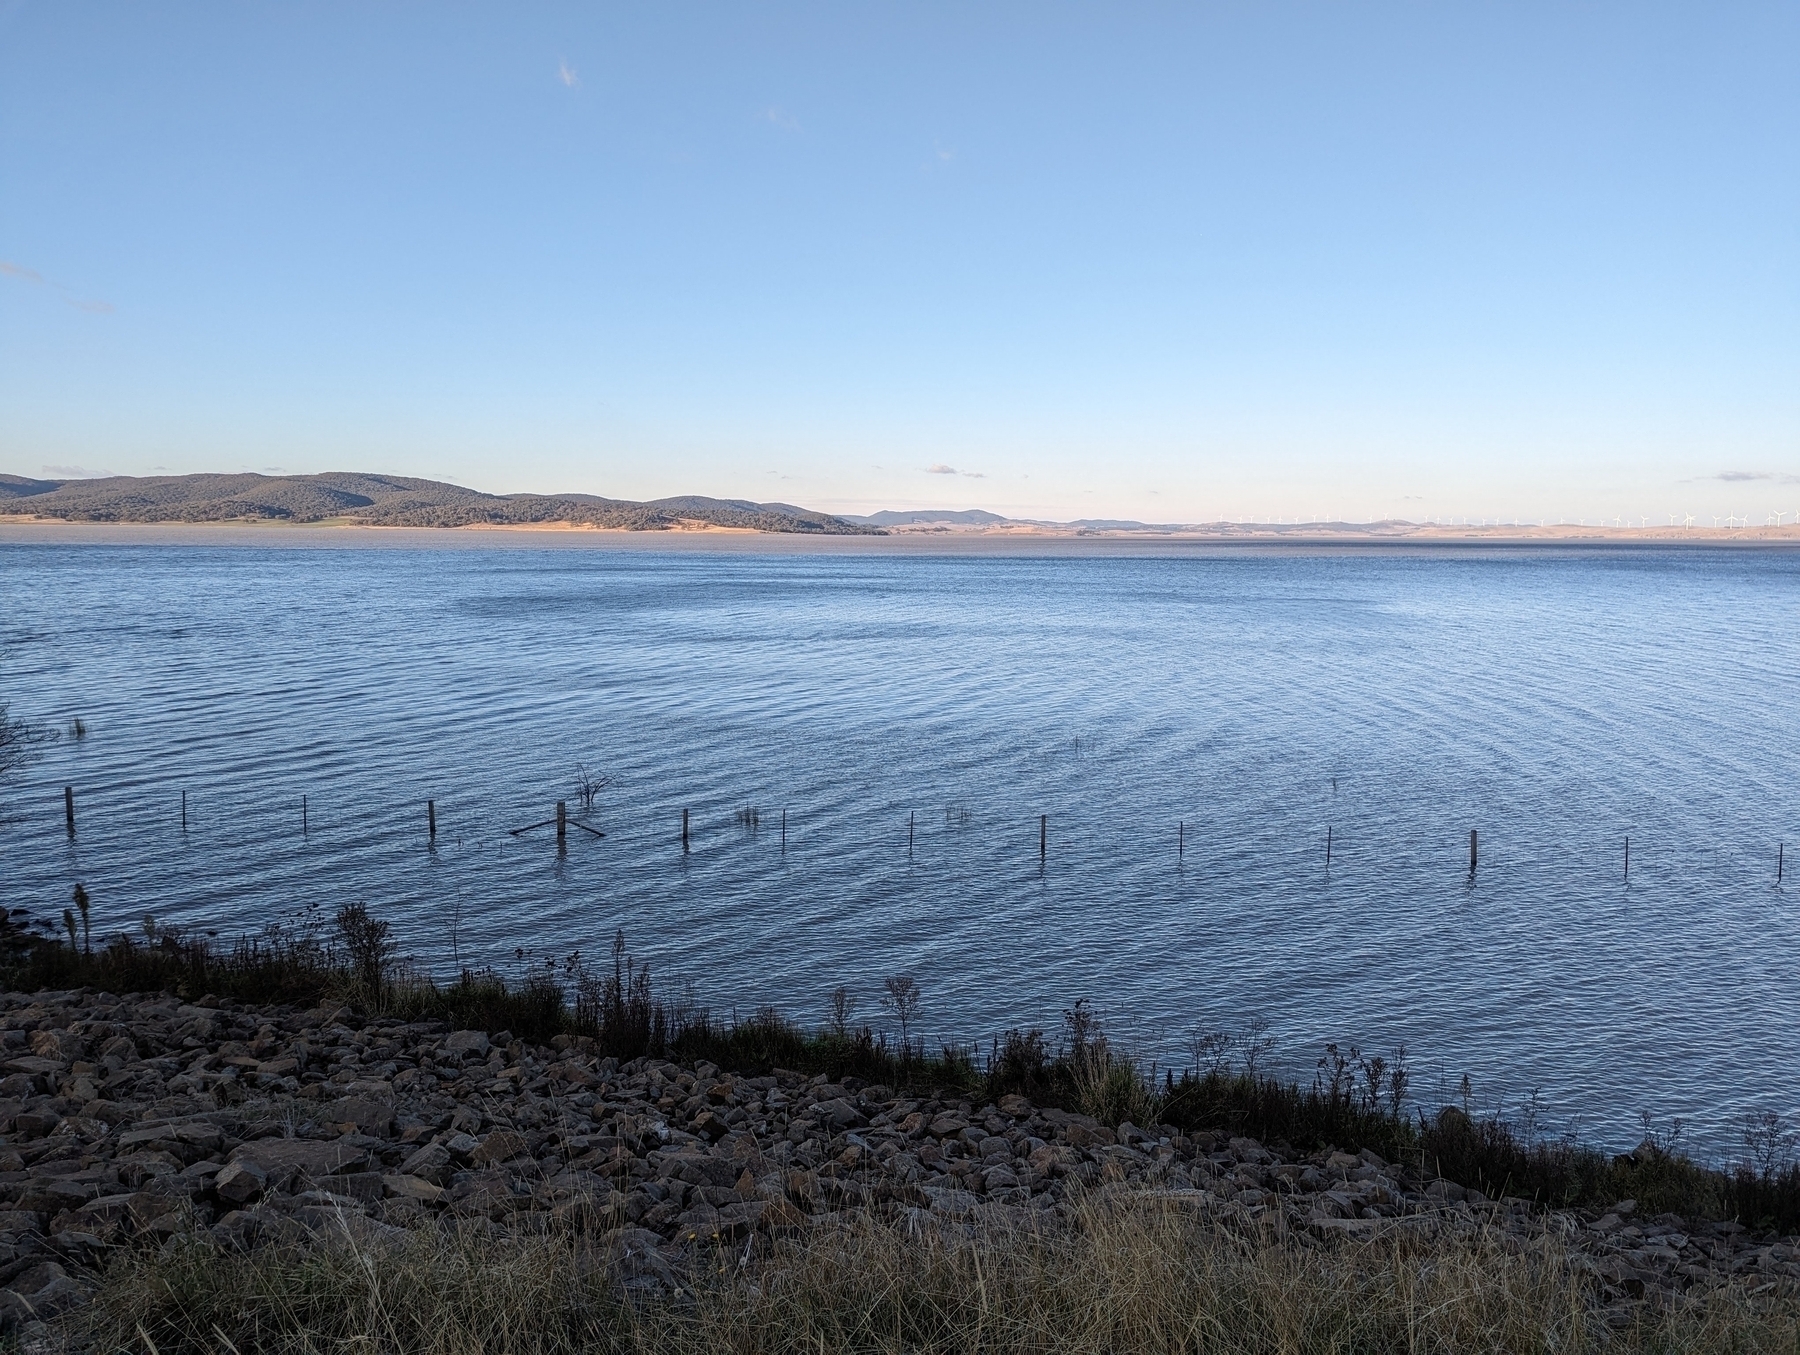 A calm, expansive body of water stretches towards a distant shoreline with rolling hills under a clear blue sky, with a rocky shoreline and some vegetation in the foreground.